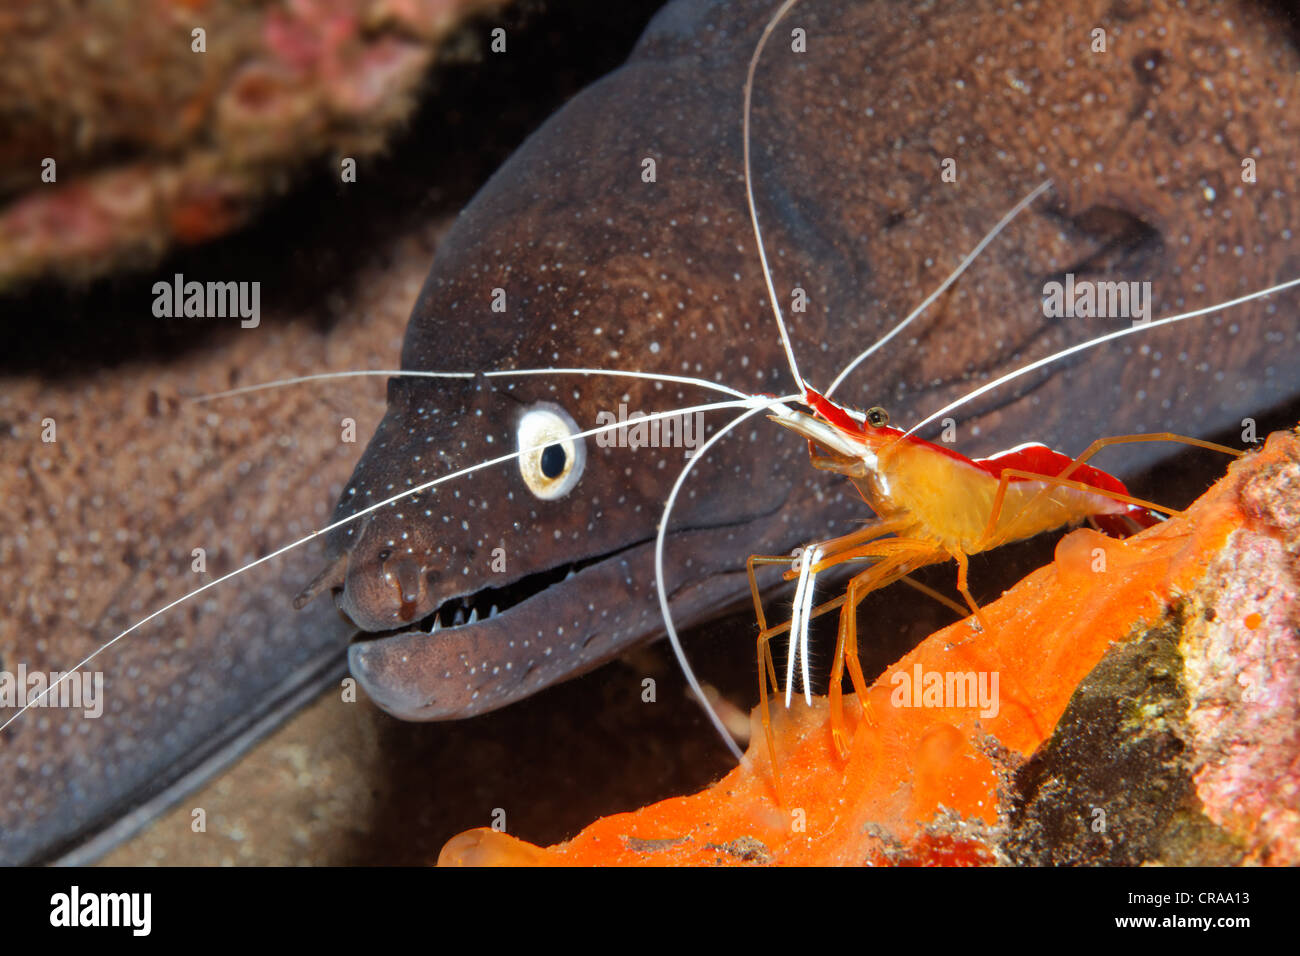 Dotted Moray Eel (Muraena augusti) with a Scarlet-striped Cleaning Shrimp (Lysmata grabhami) in its hideaway, Madeira, Portugal Stock Photo